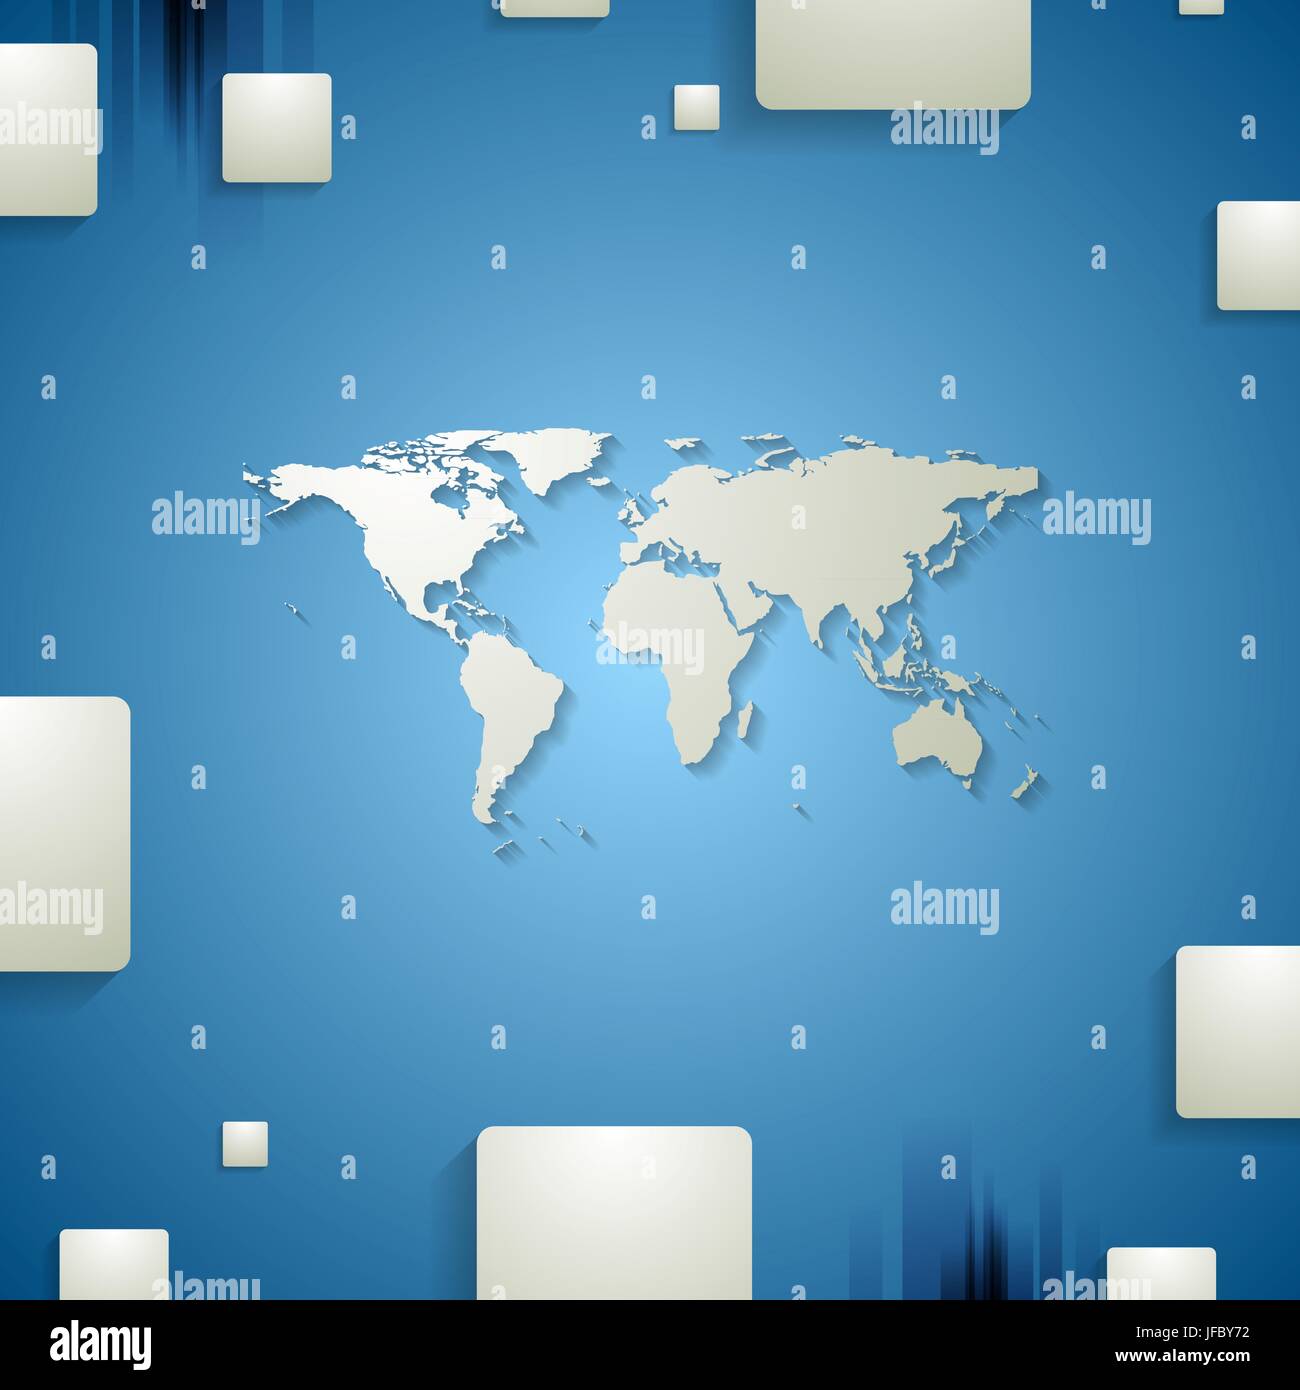 Tech corporate blue design with earth map Stock Photo